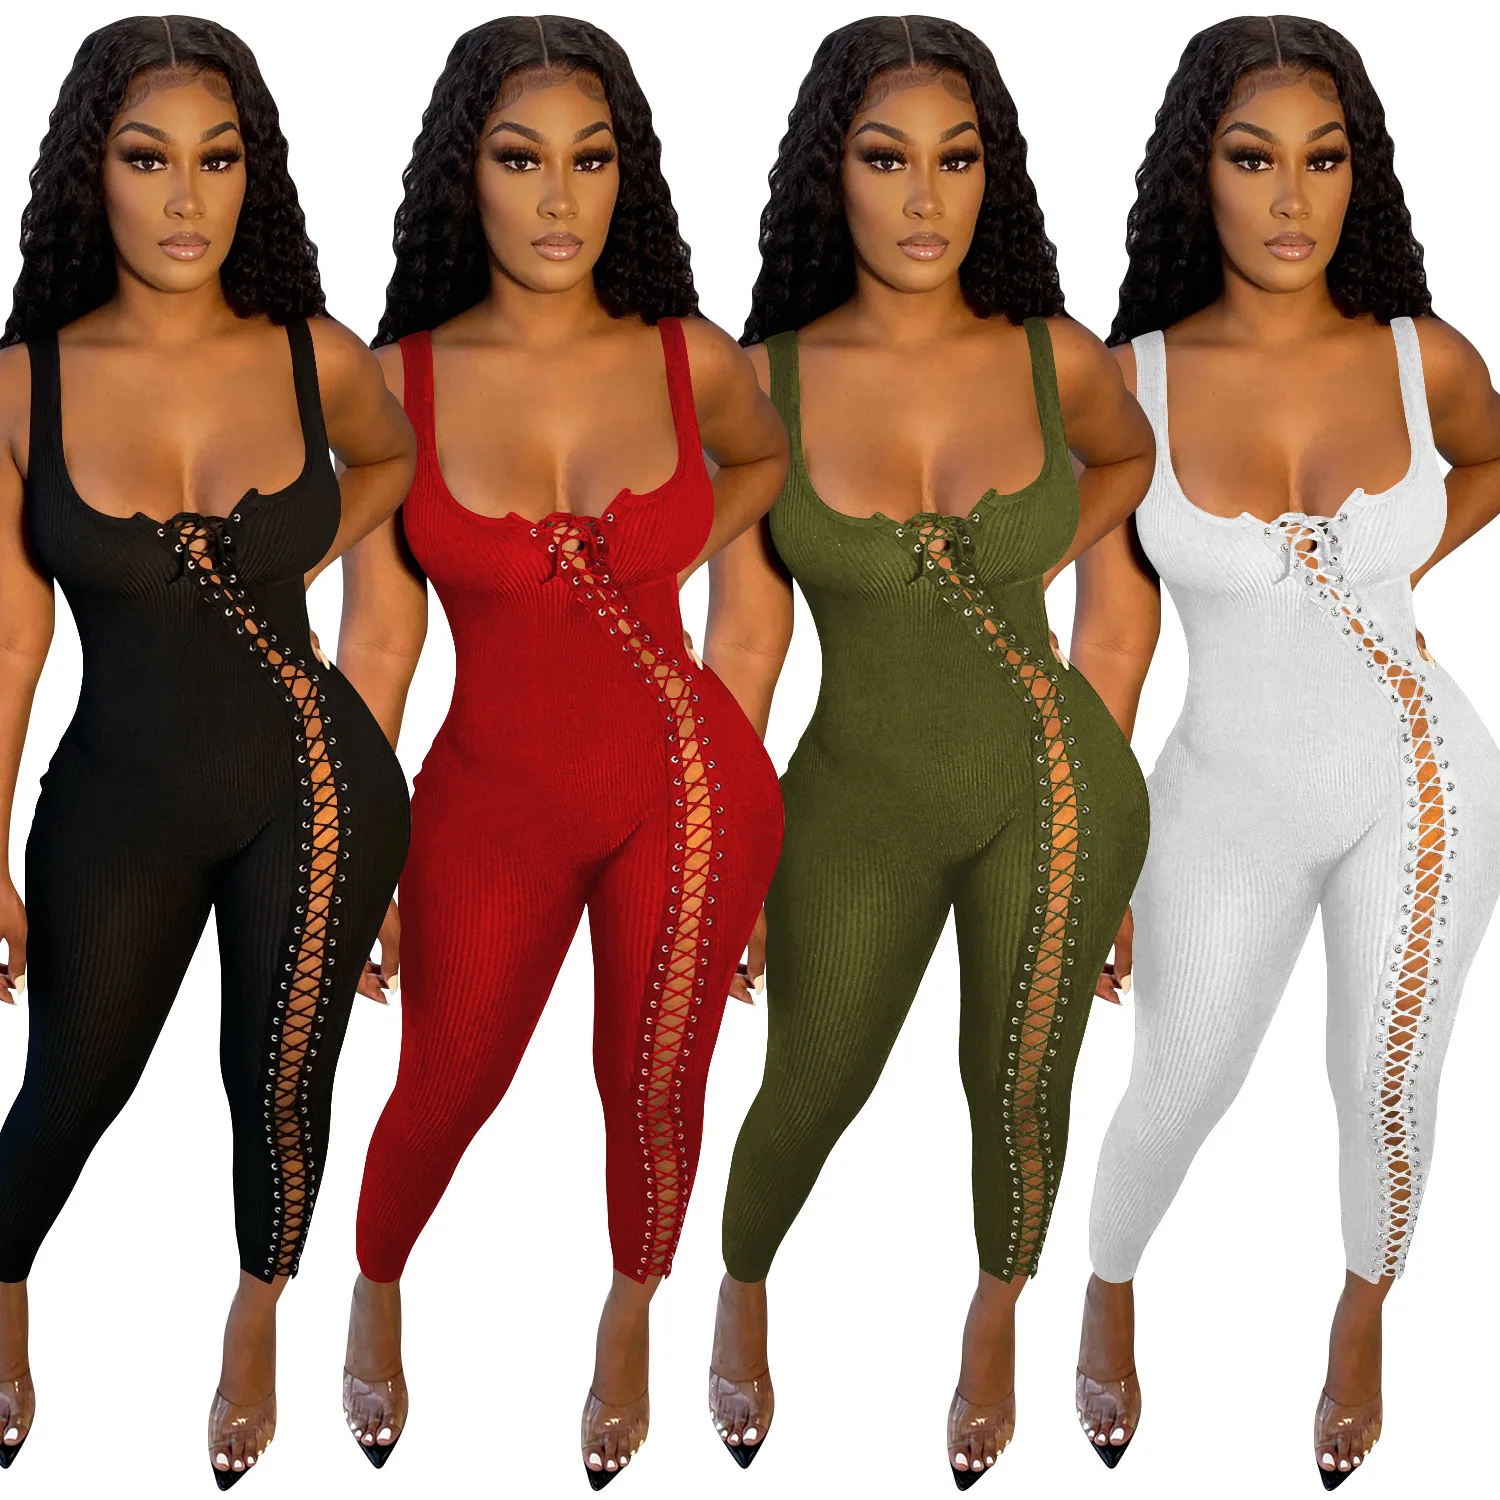 

GX5245C Wholesale 2022 New Arrivals Square Collar Women Bodysuit Fashion Summer New Sexy Strappy Cutout One Piece Jumpsuit, Picture